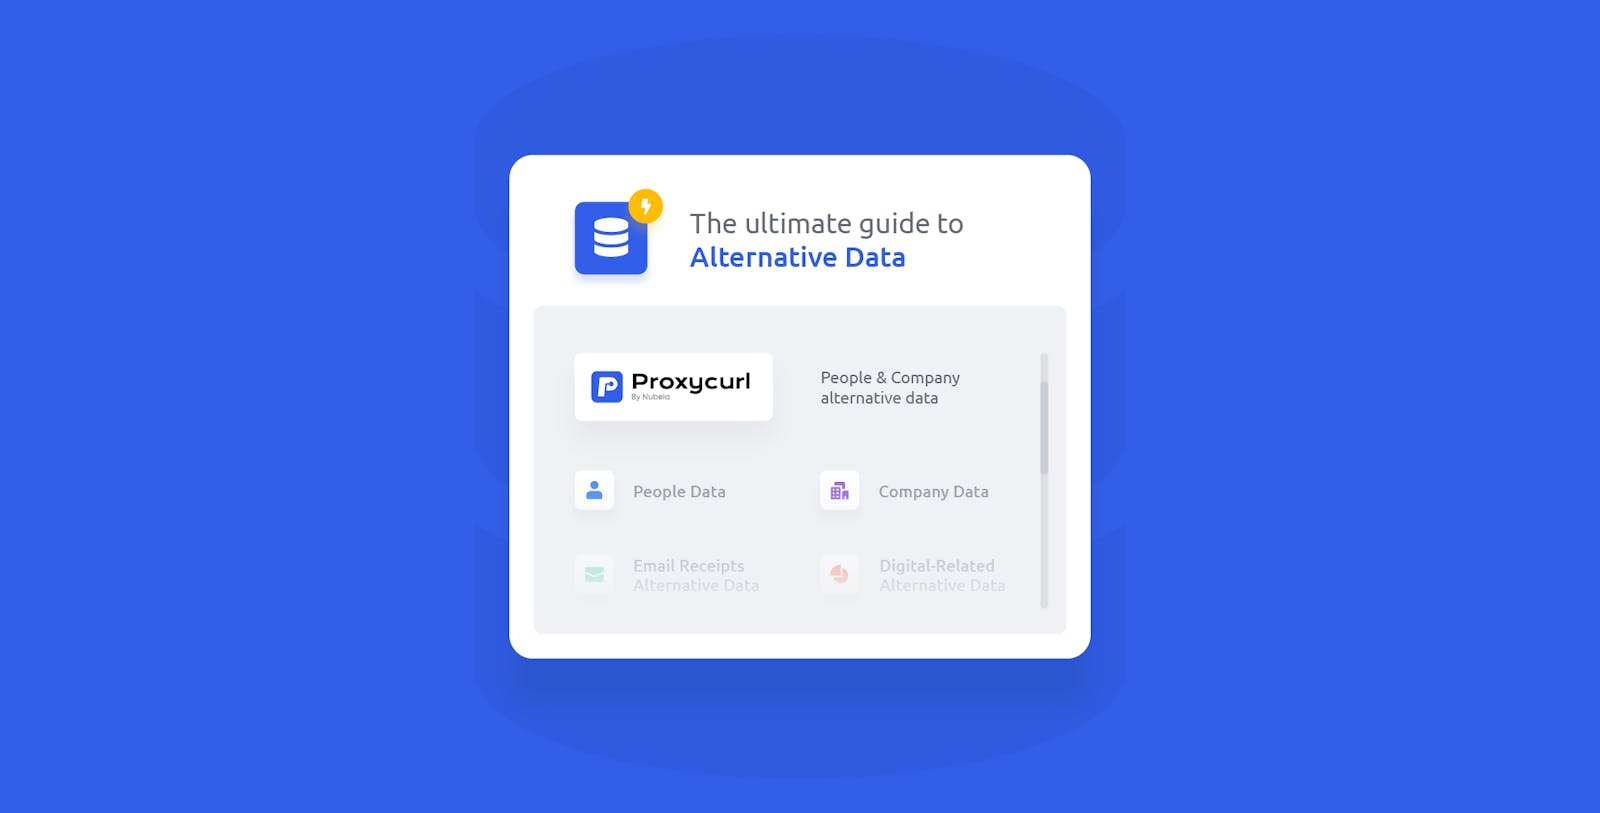 The Ultimate Guide to Alternative Data - What Is It Really